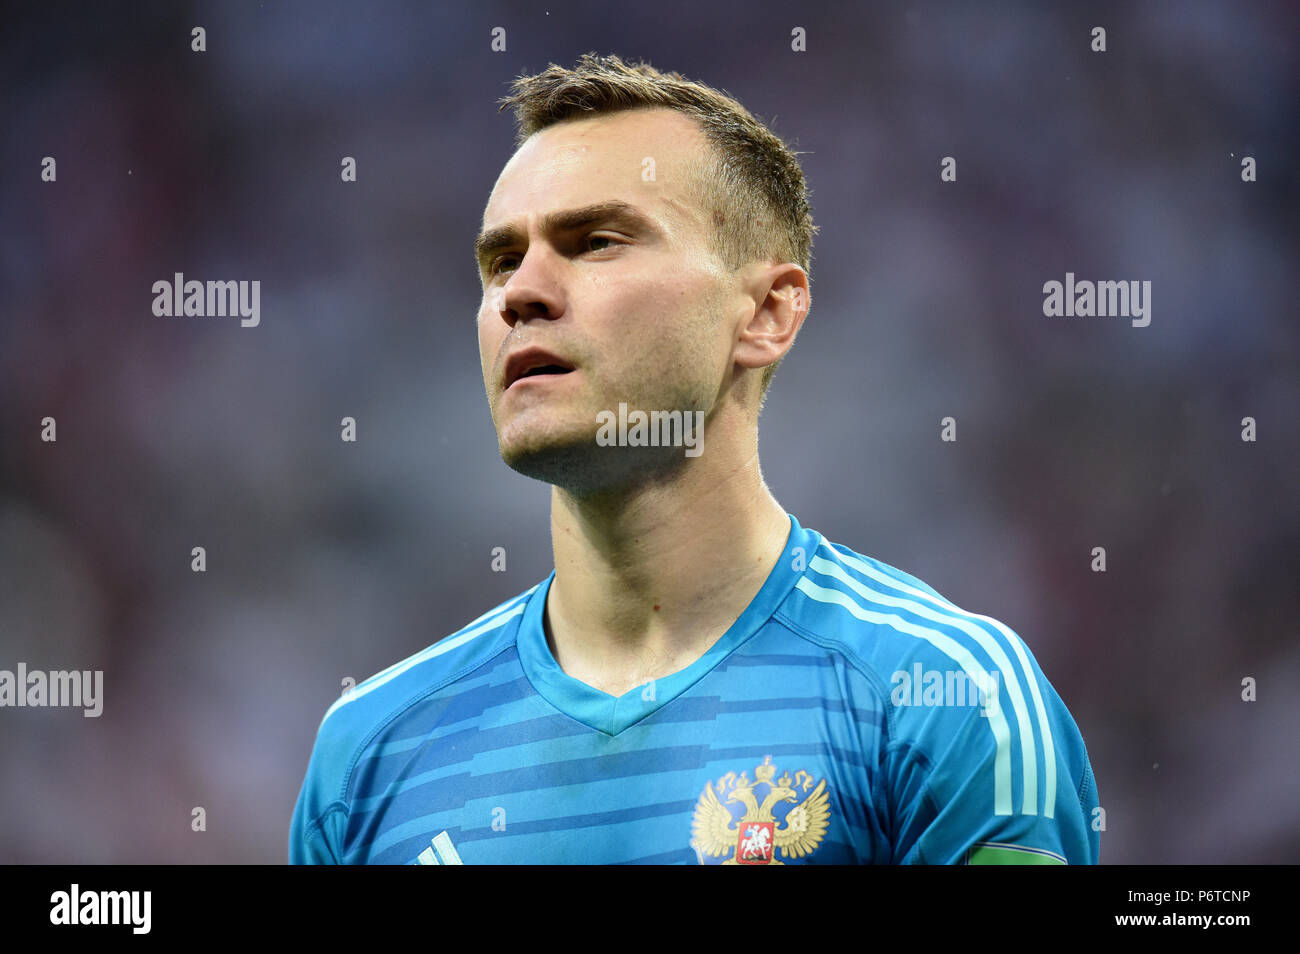 Moscow, Russia - July 1, 2018. Russian national football team goalkeeper Igor Akinfeev during penalty shootout in FIFA World Cup 2018 Round of 16 matc Stock Photo